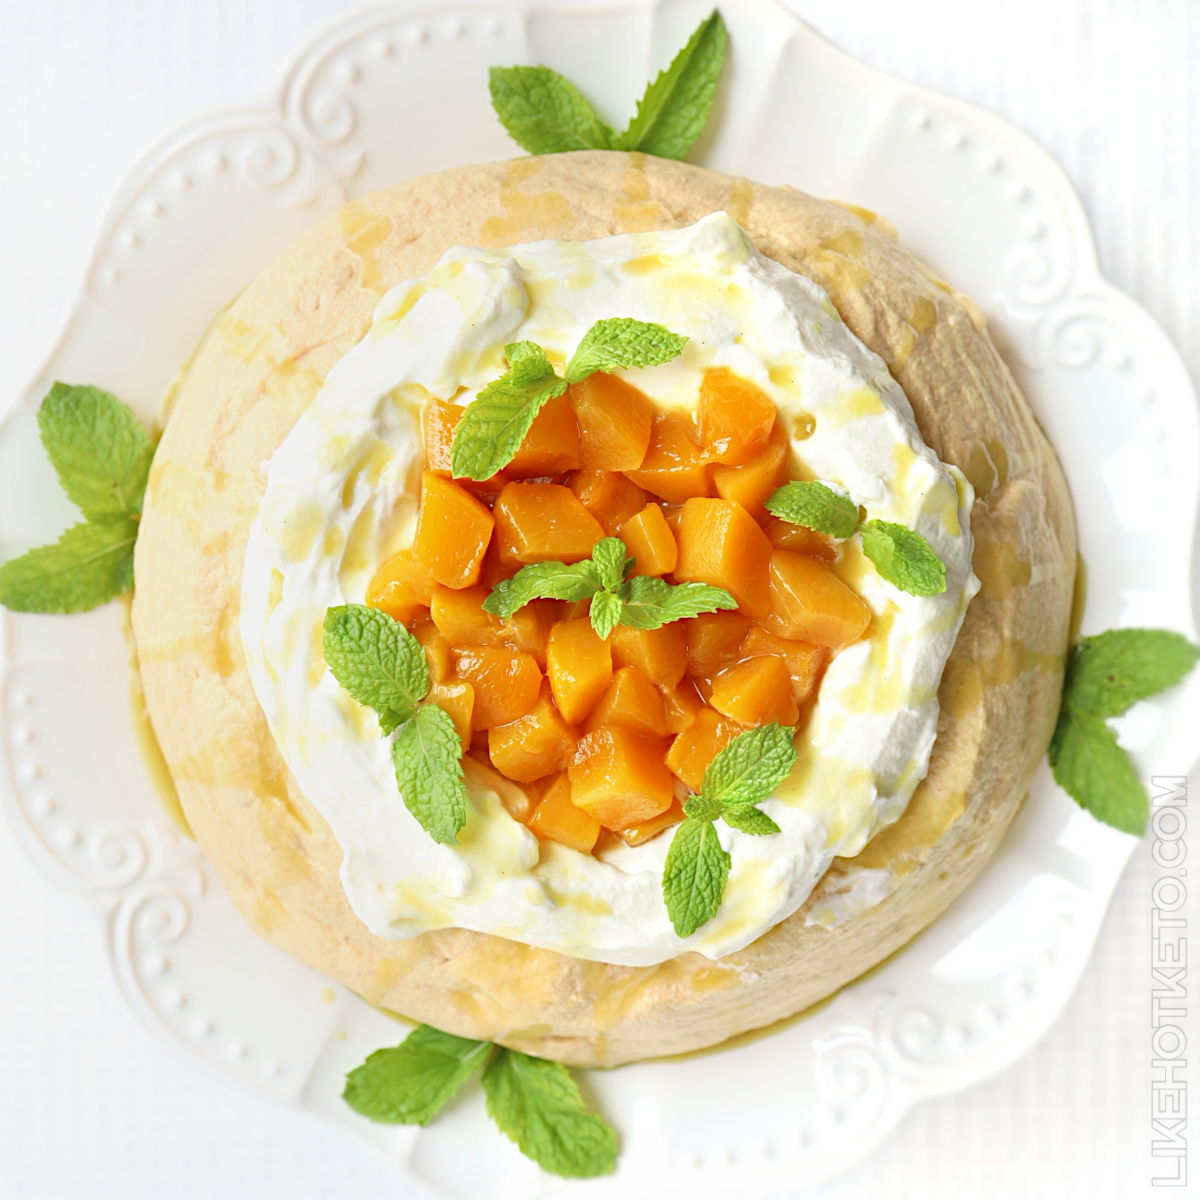 Sugar-free pavlova topped with summer peaches and cream and garnished with mint leaves.